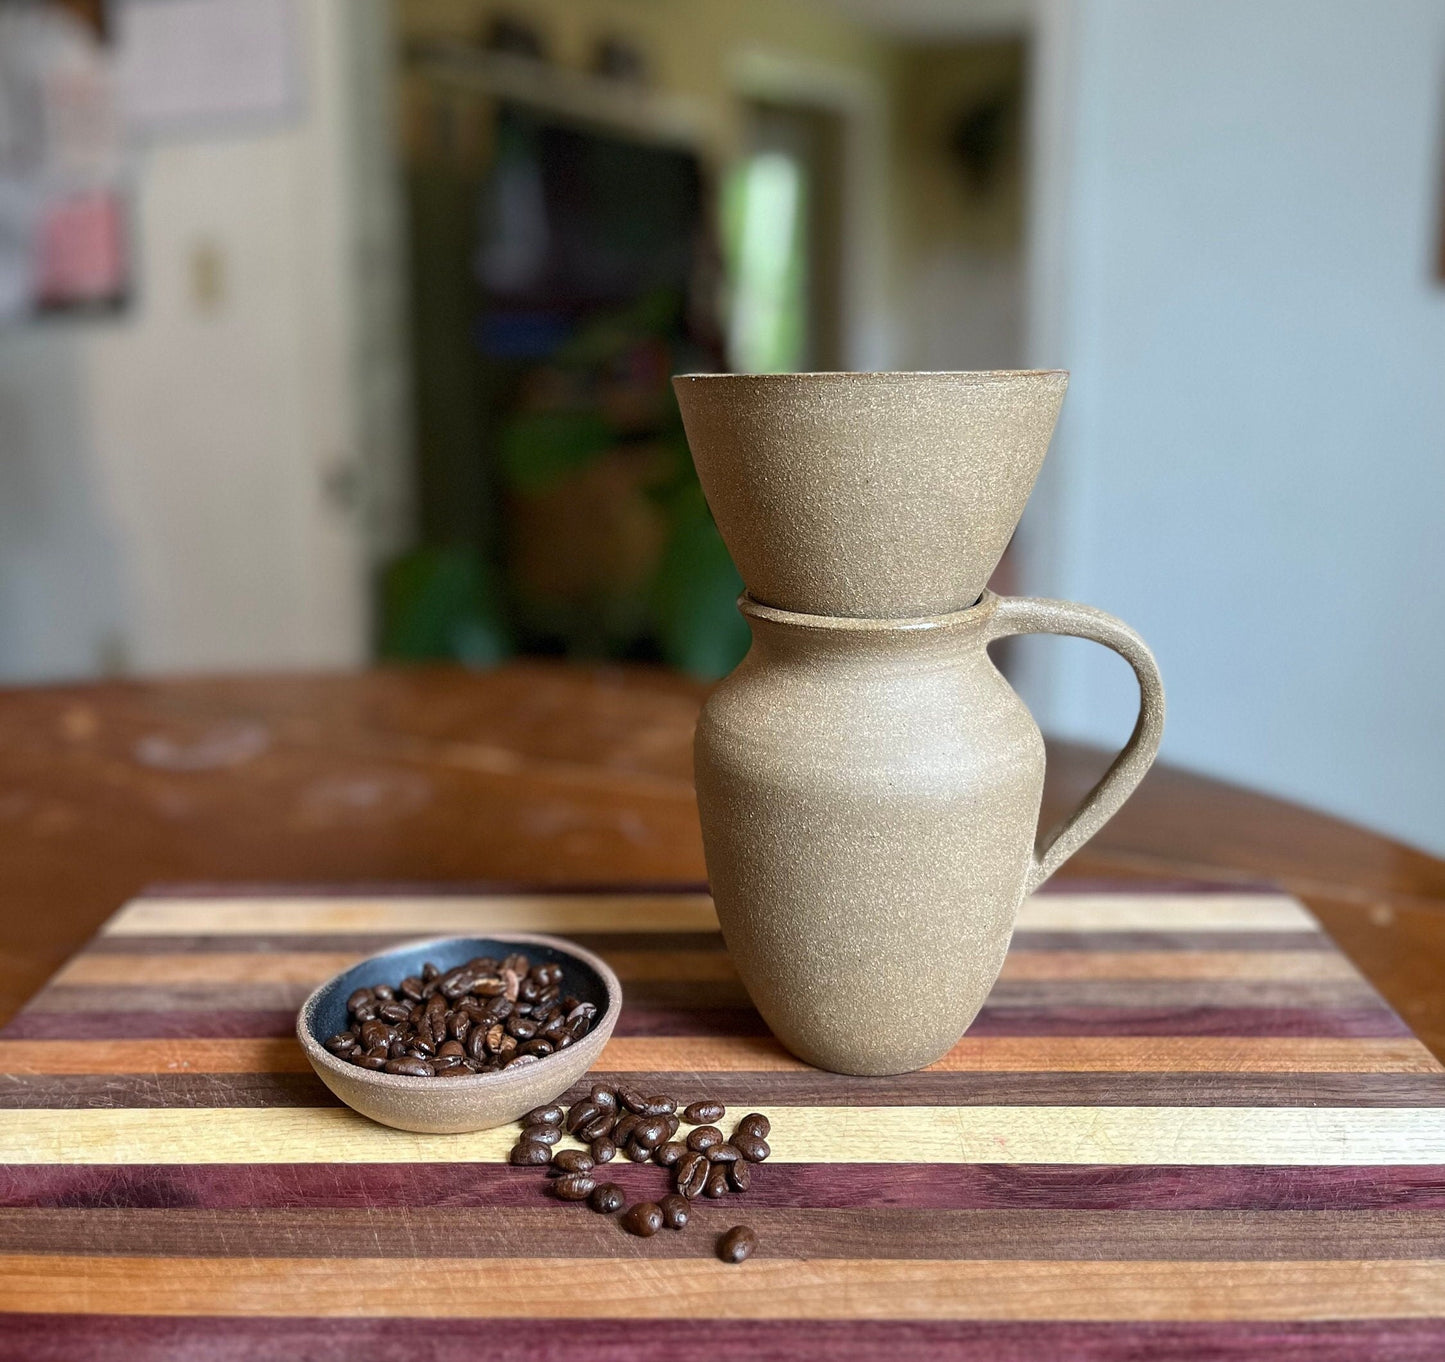 The Chosen Inspired Ceramic Pour Over Set  | Coffee Dripper | First century Inspired Coffee Brewer Pitcher Set - Pottery Brewer & Pitcher